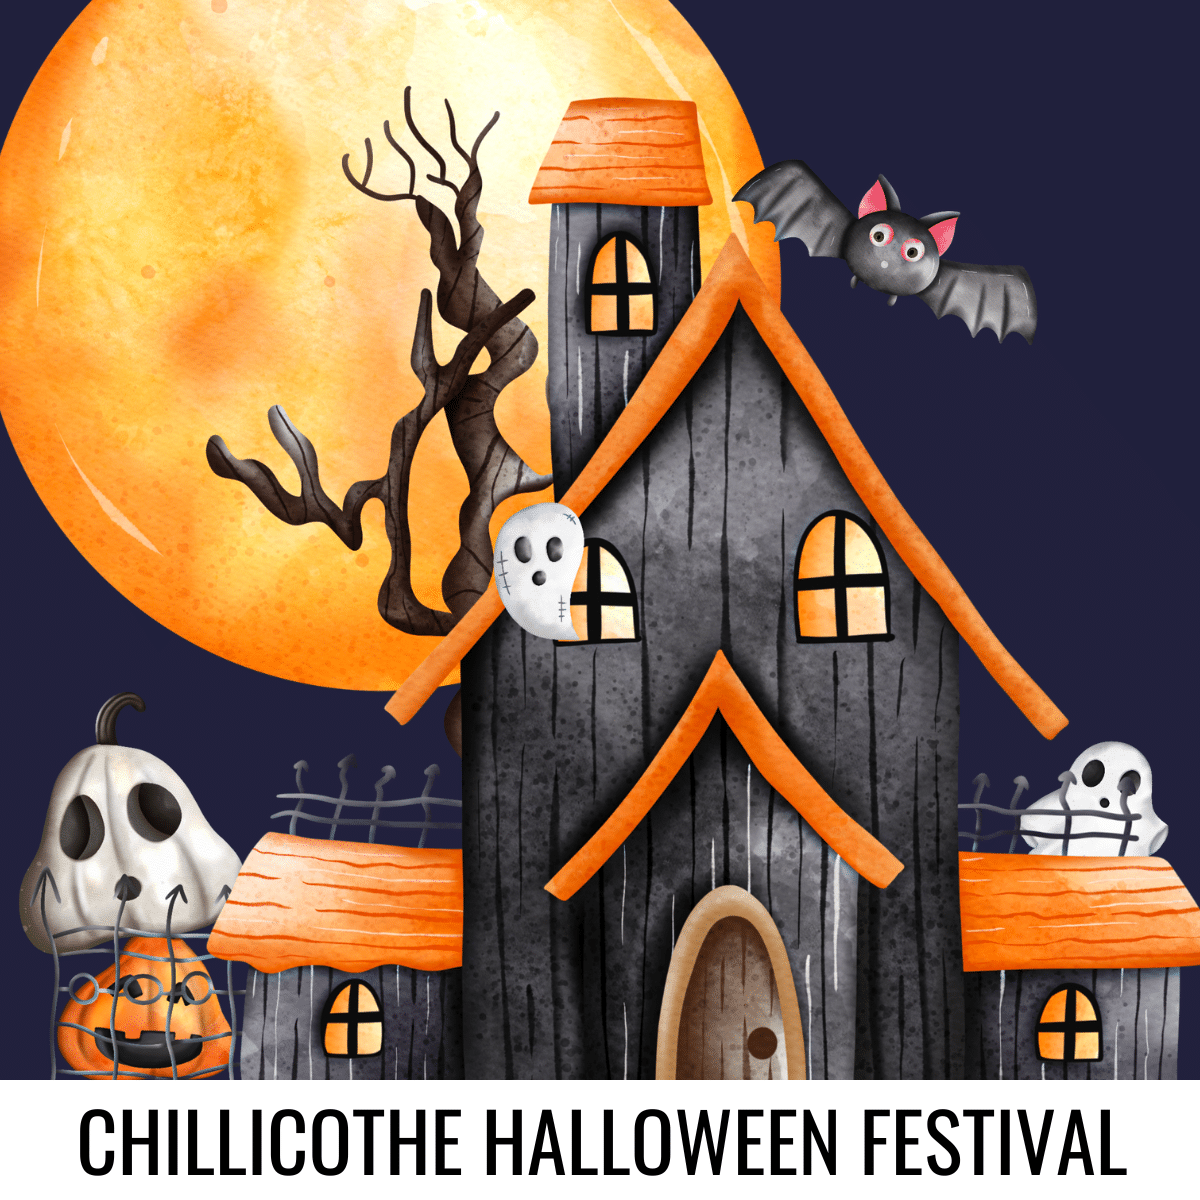 square image with a cartoon of a haunted house, pumpkins, ghosts, bats and a full moon in the background. A white strip at the bottom has the text Chillicothe Halloween Festival. Image via Canva pro license